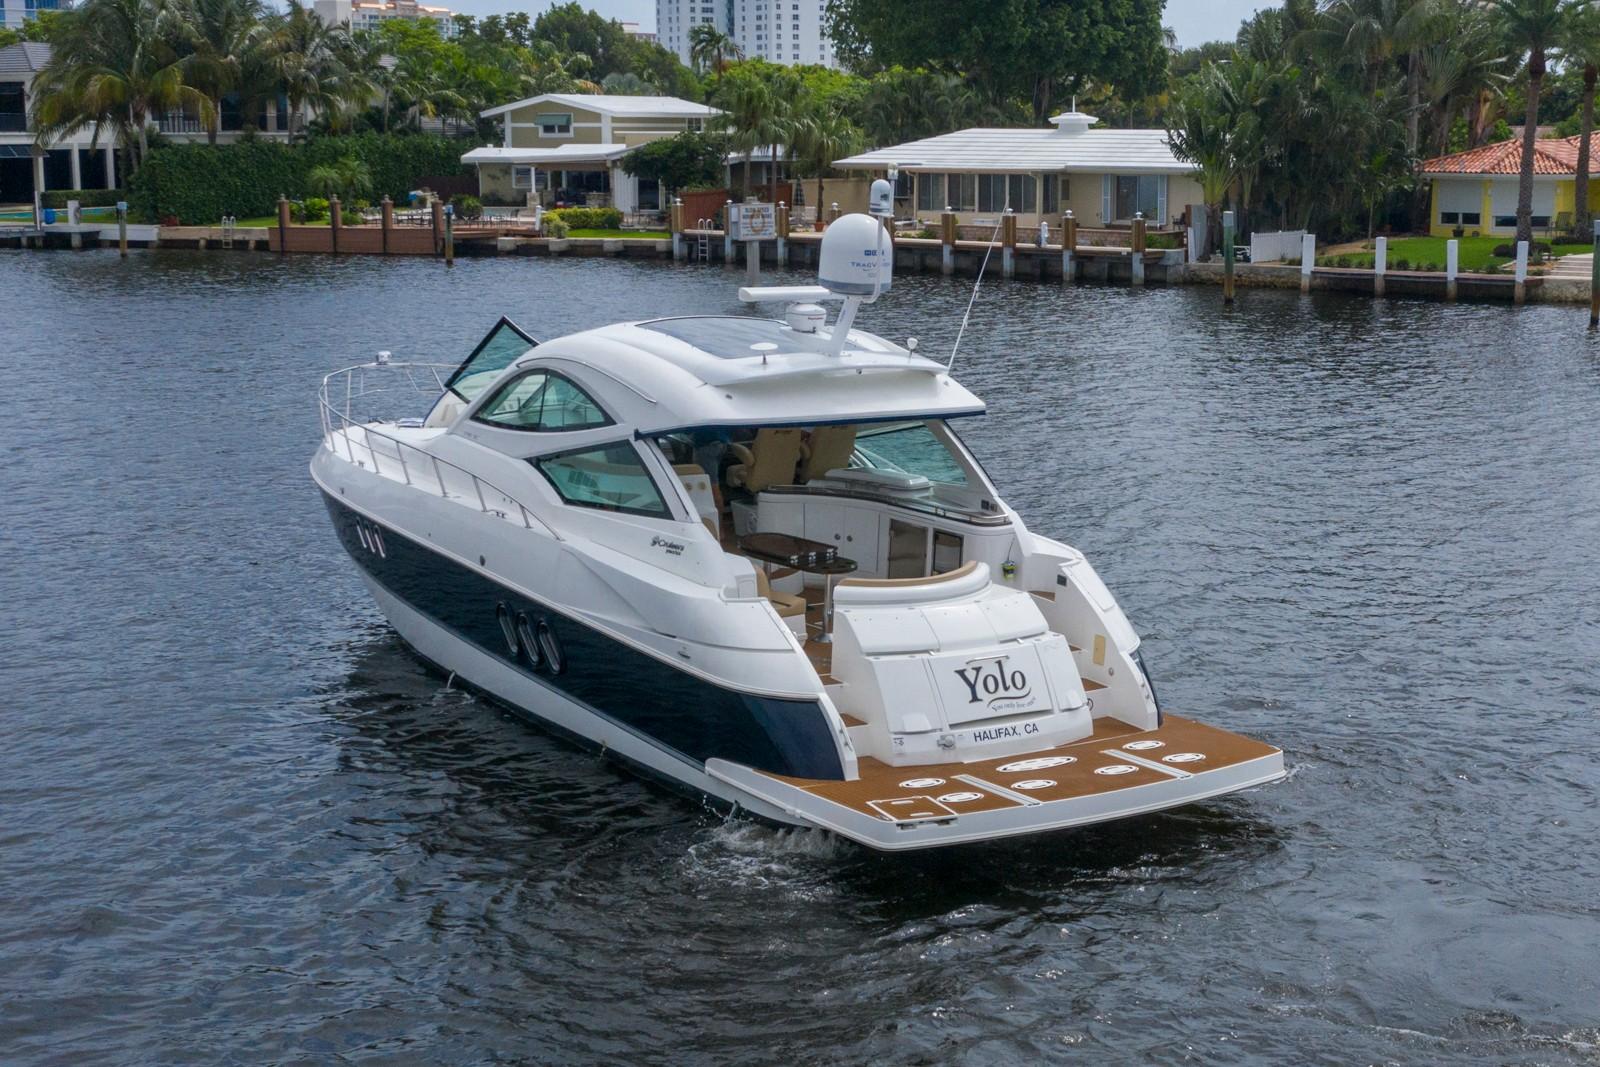 54 ft yachts for sale